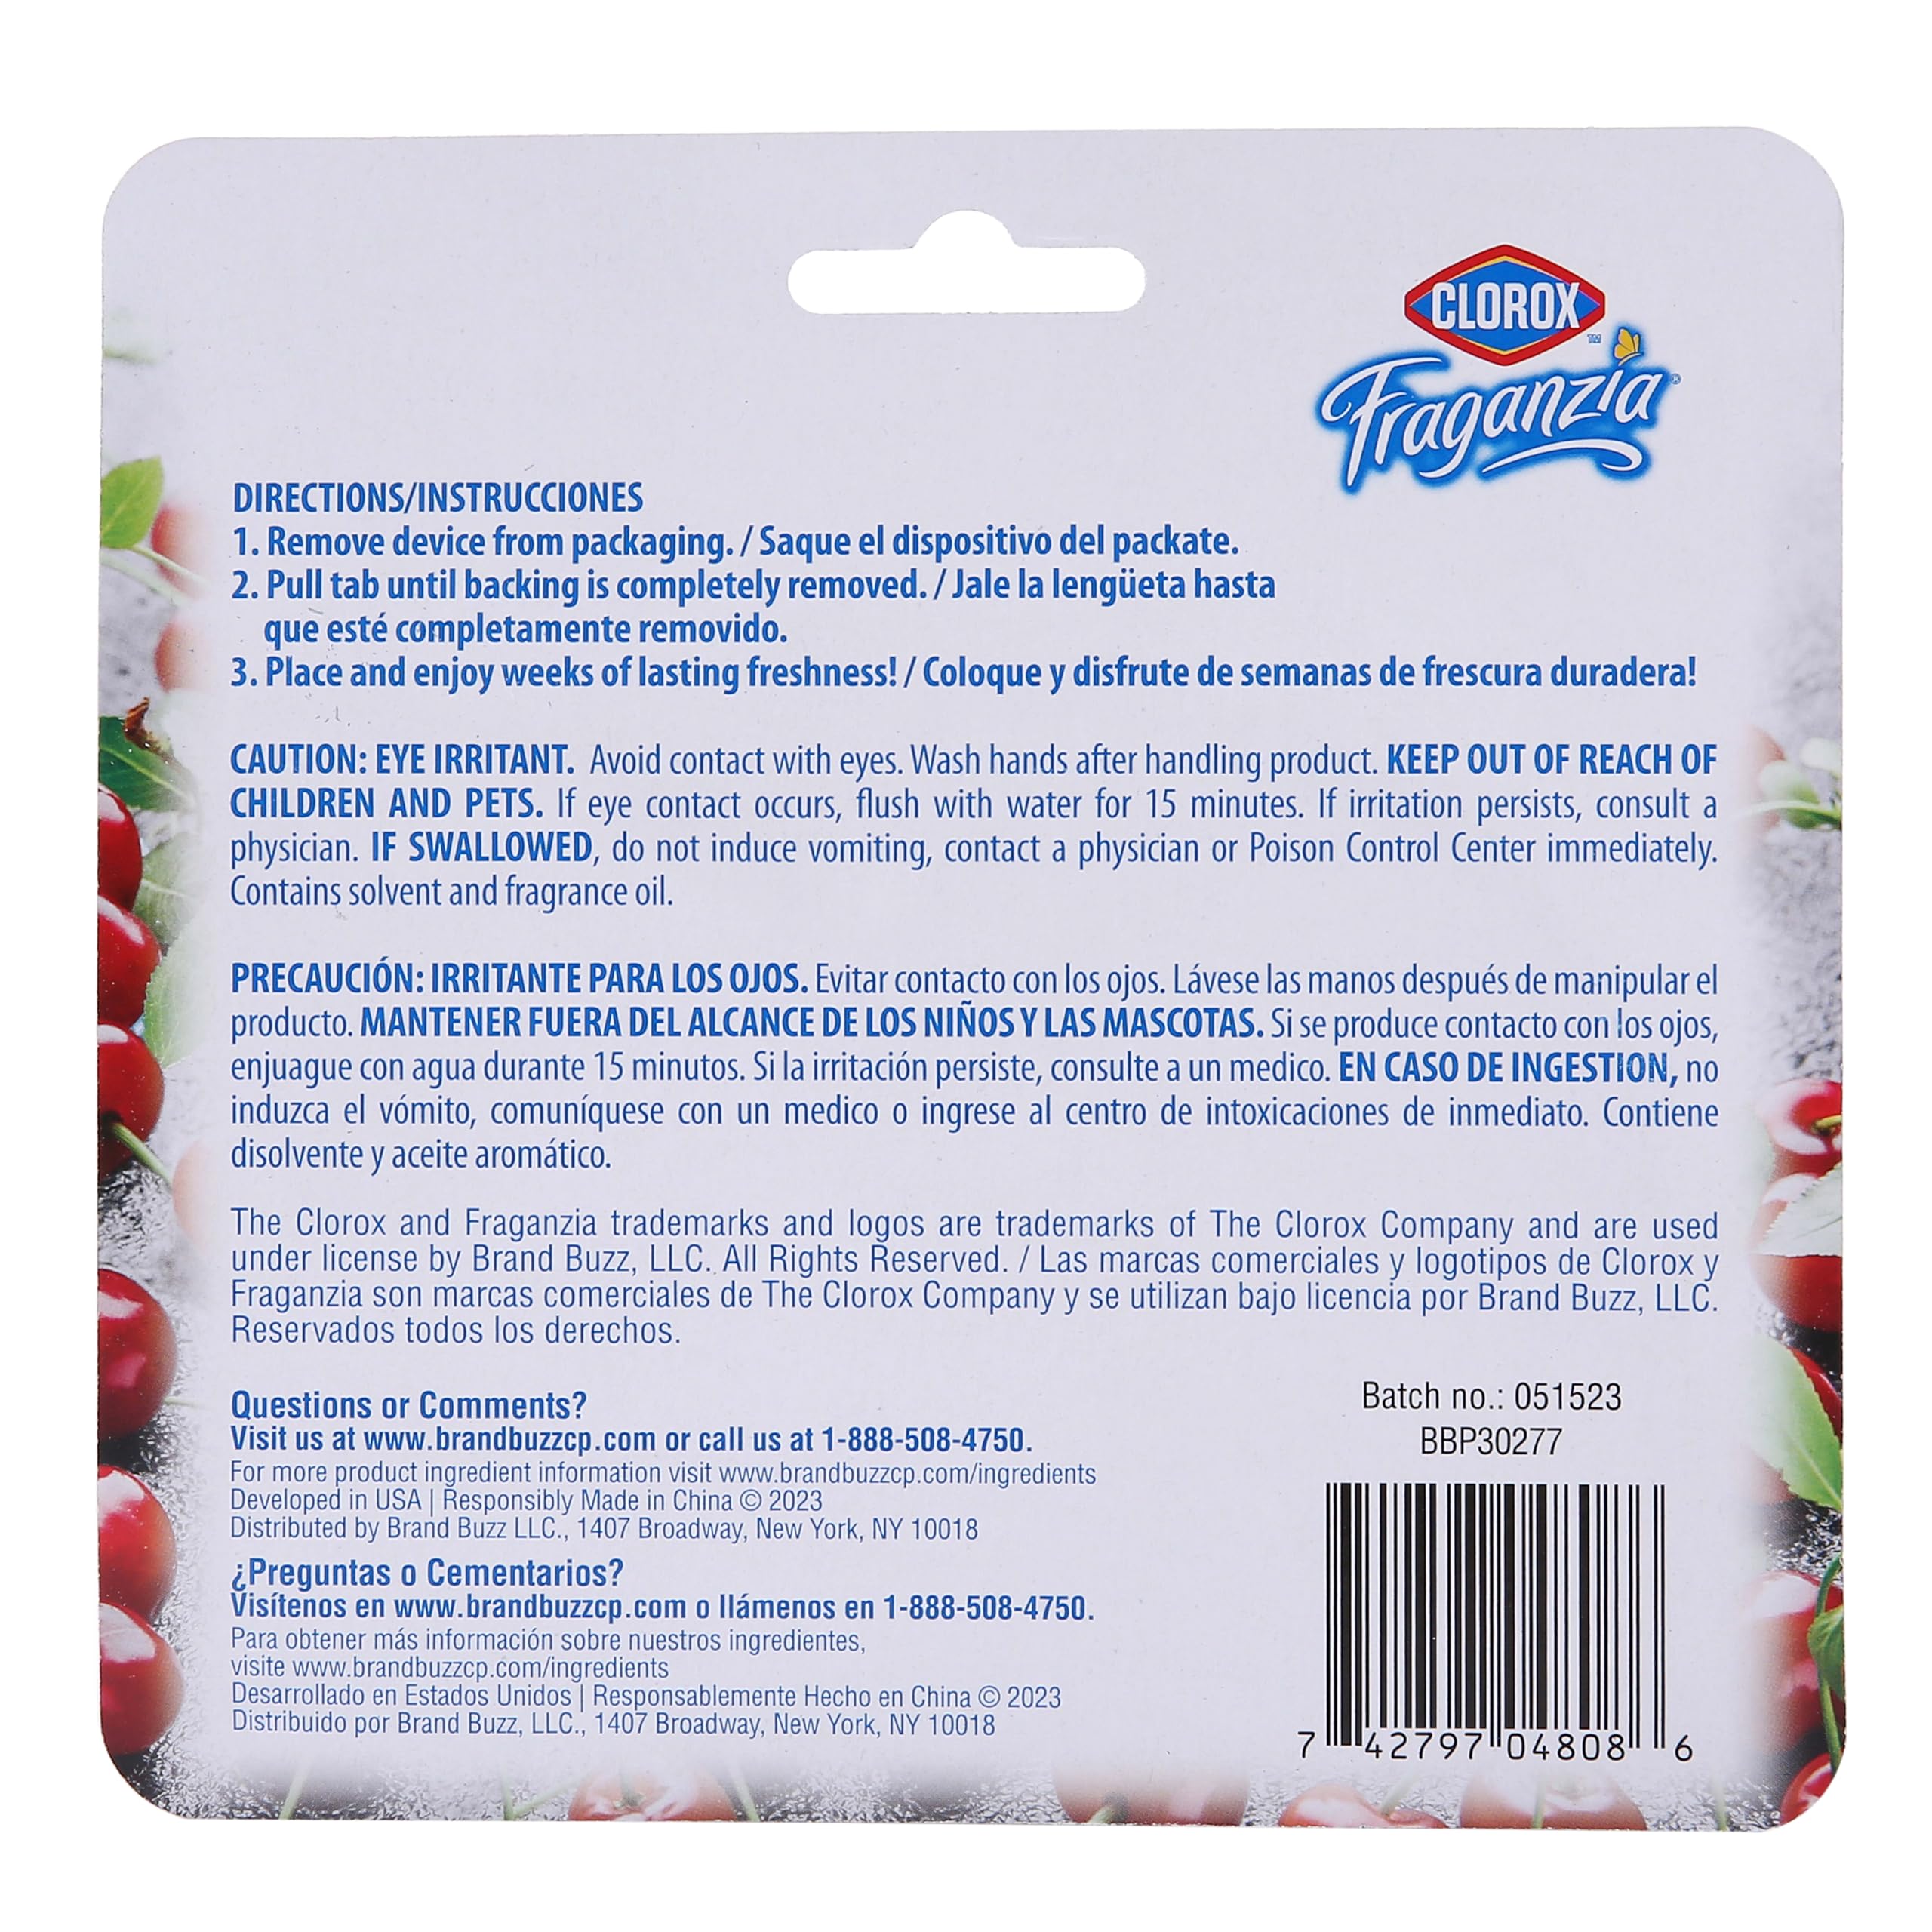 Clorox Fraganzia Small Rooms Air Freshener in Cherry Burst Scent, 2ct | Peel & Place Air Freshener, No-Plug, Battery-Free for Closets, Laundry Room, Entry Way, Bathroom, Locker, 2 Air Freshener Units